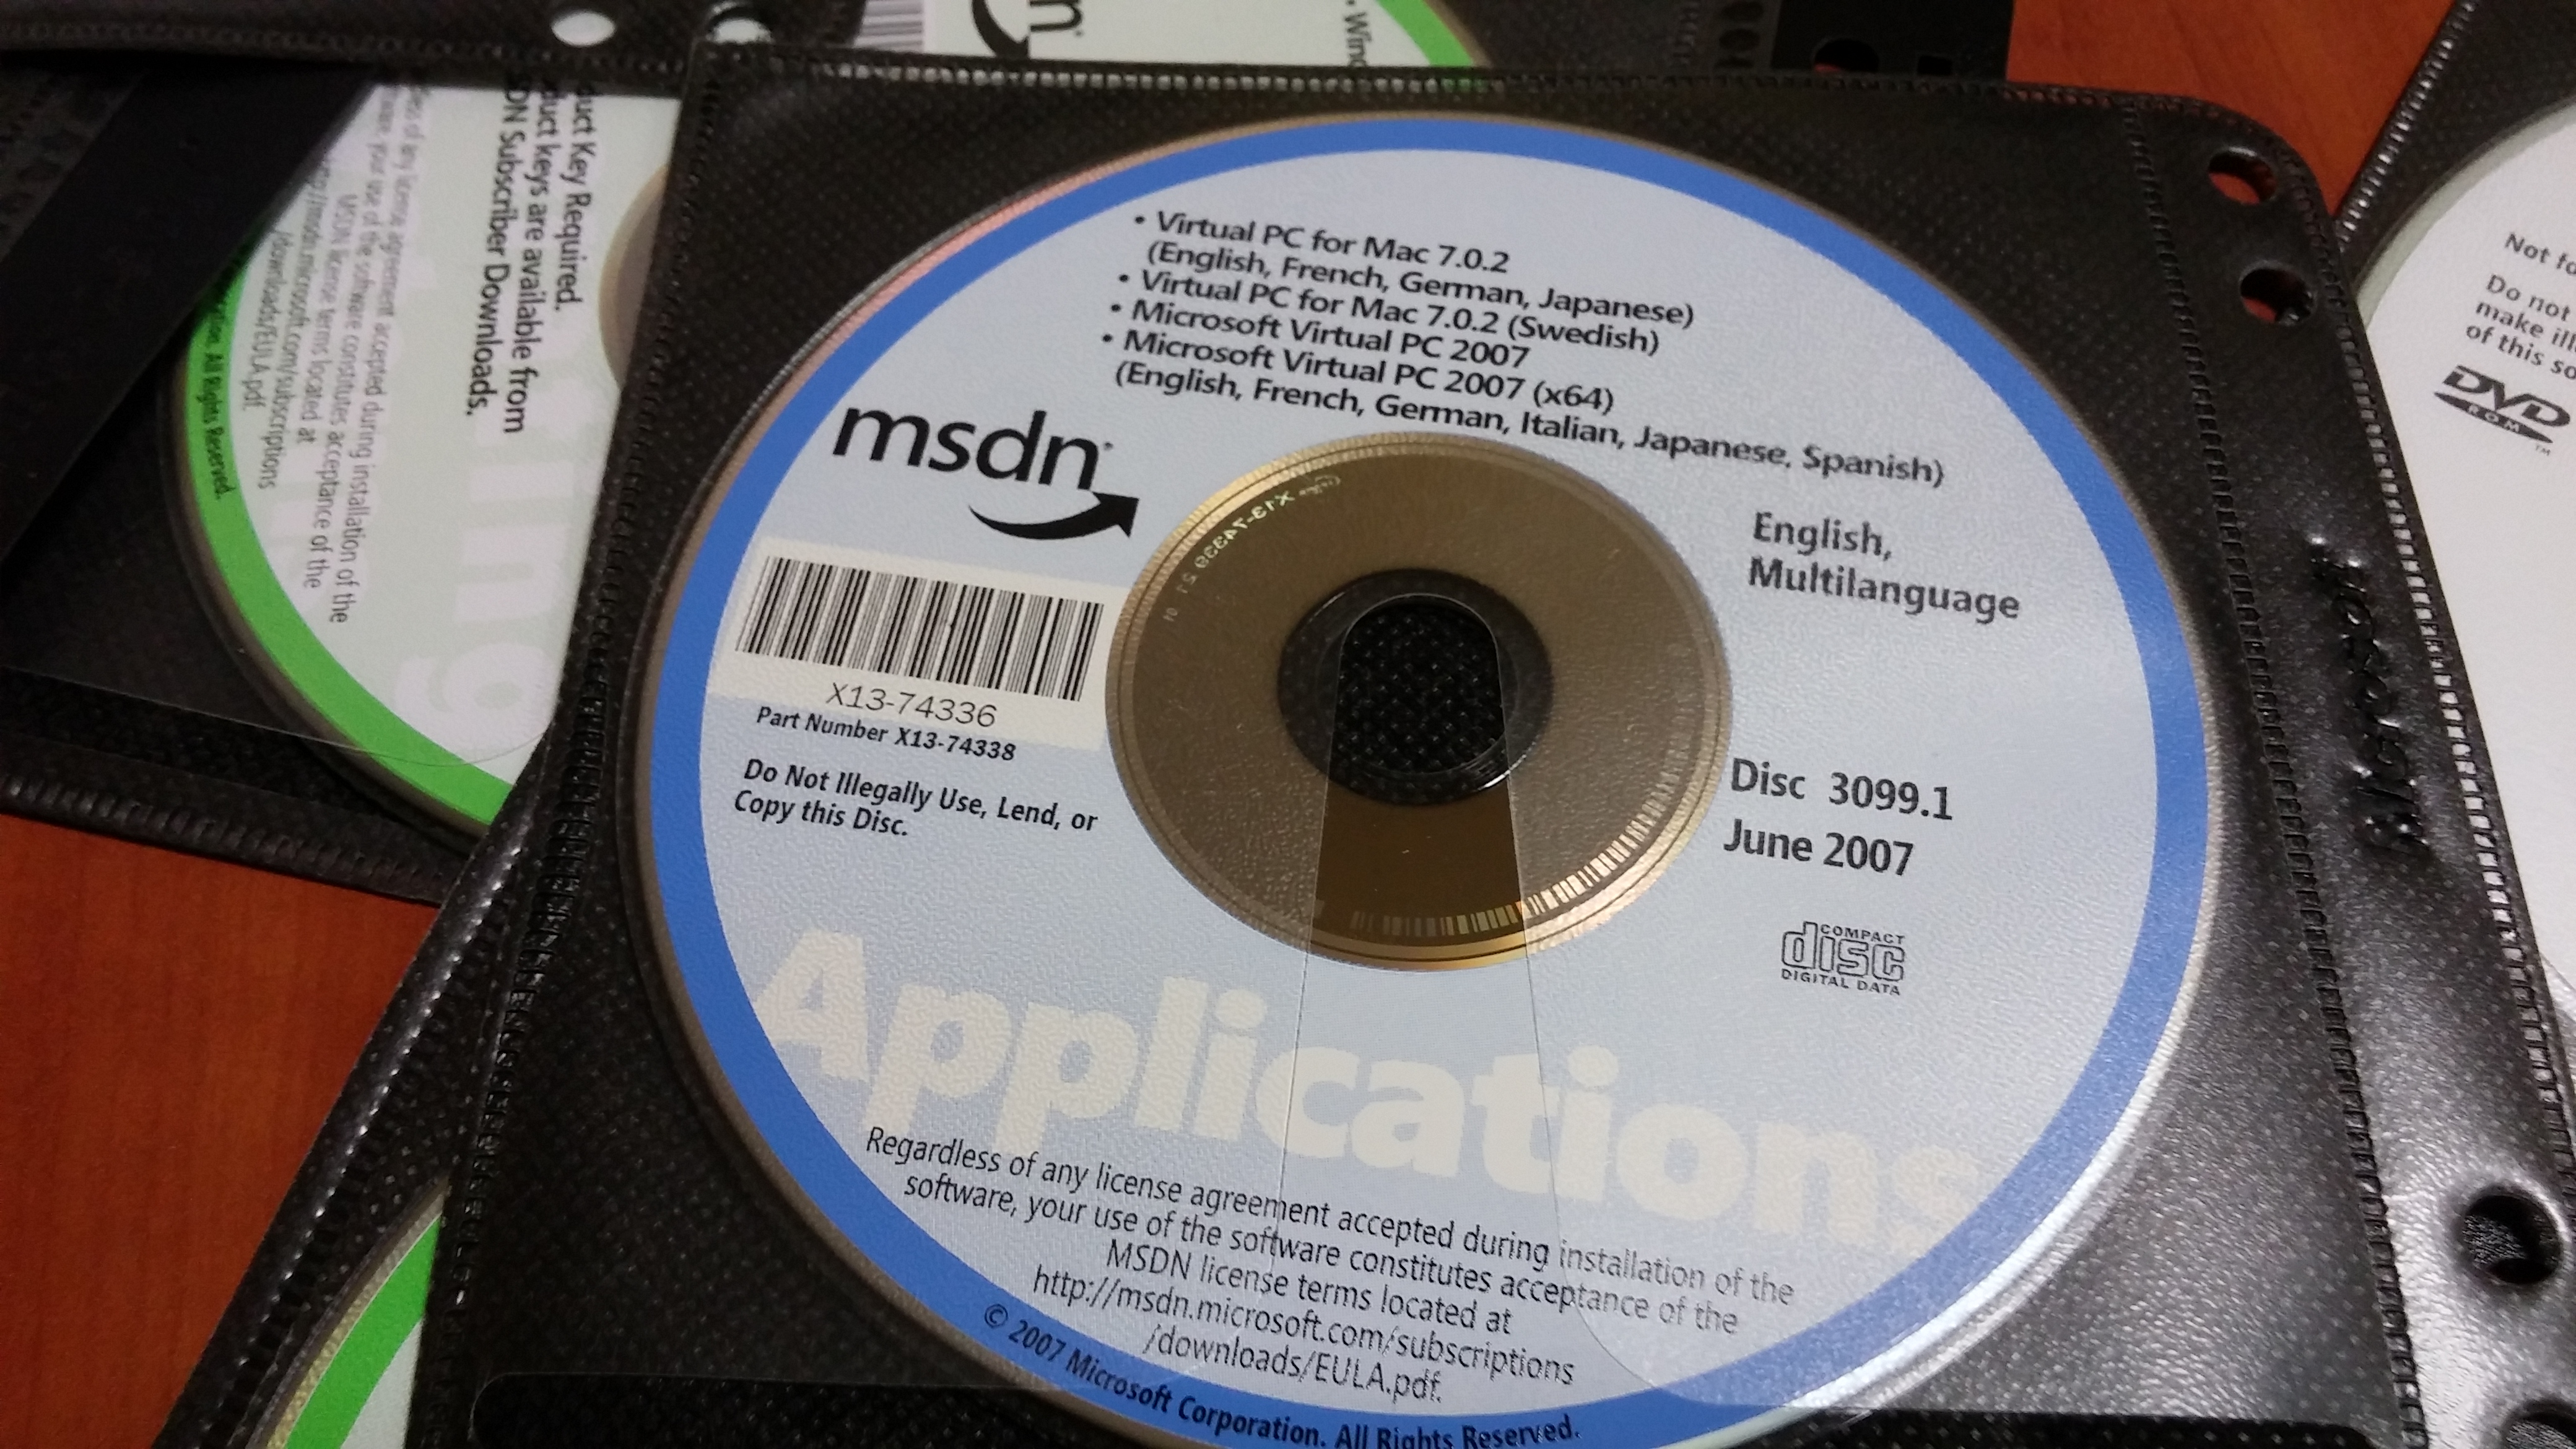 MSDN disk from June 2007